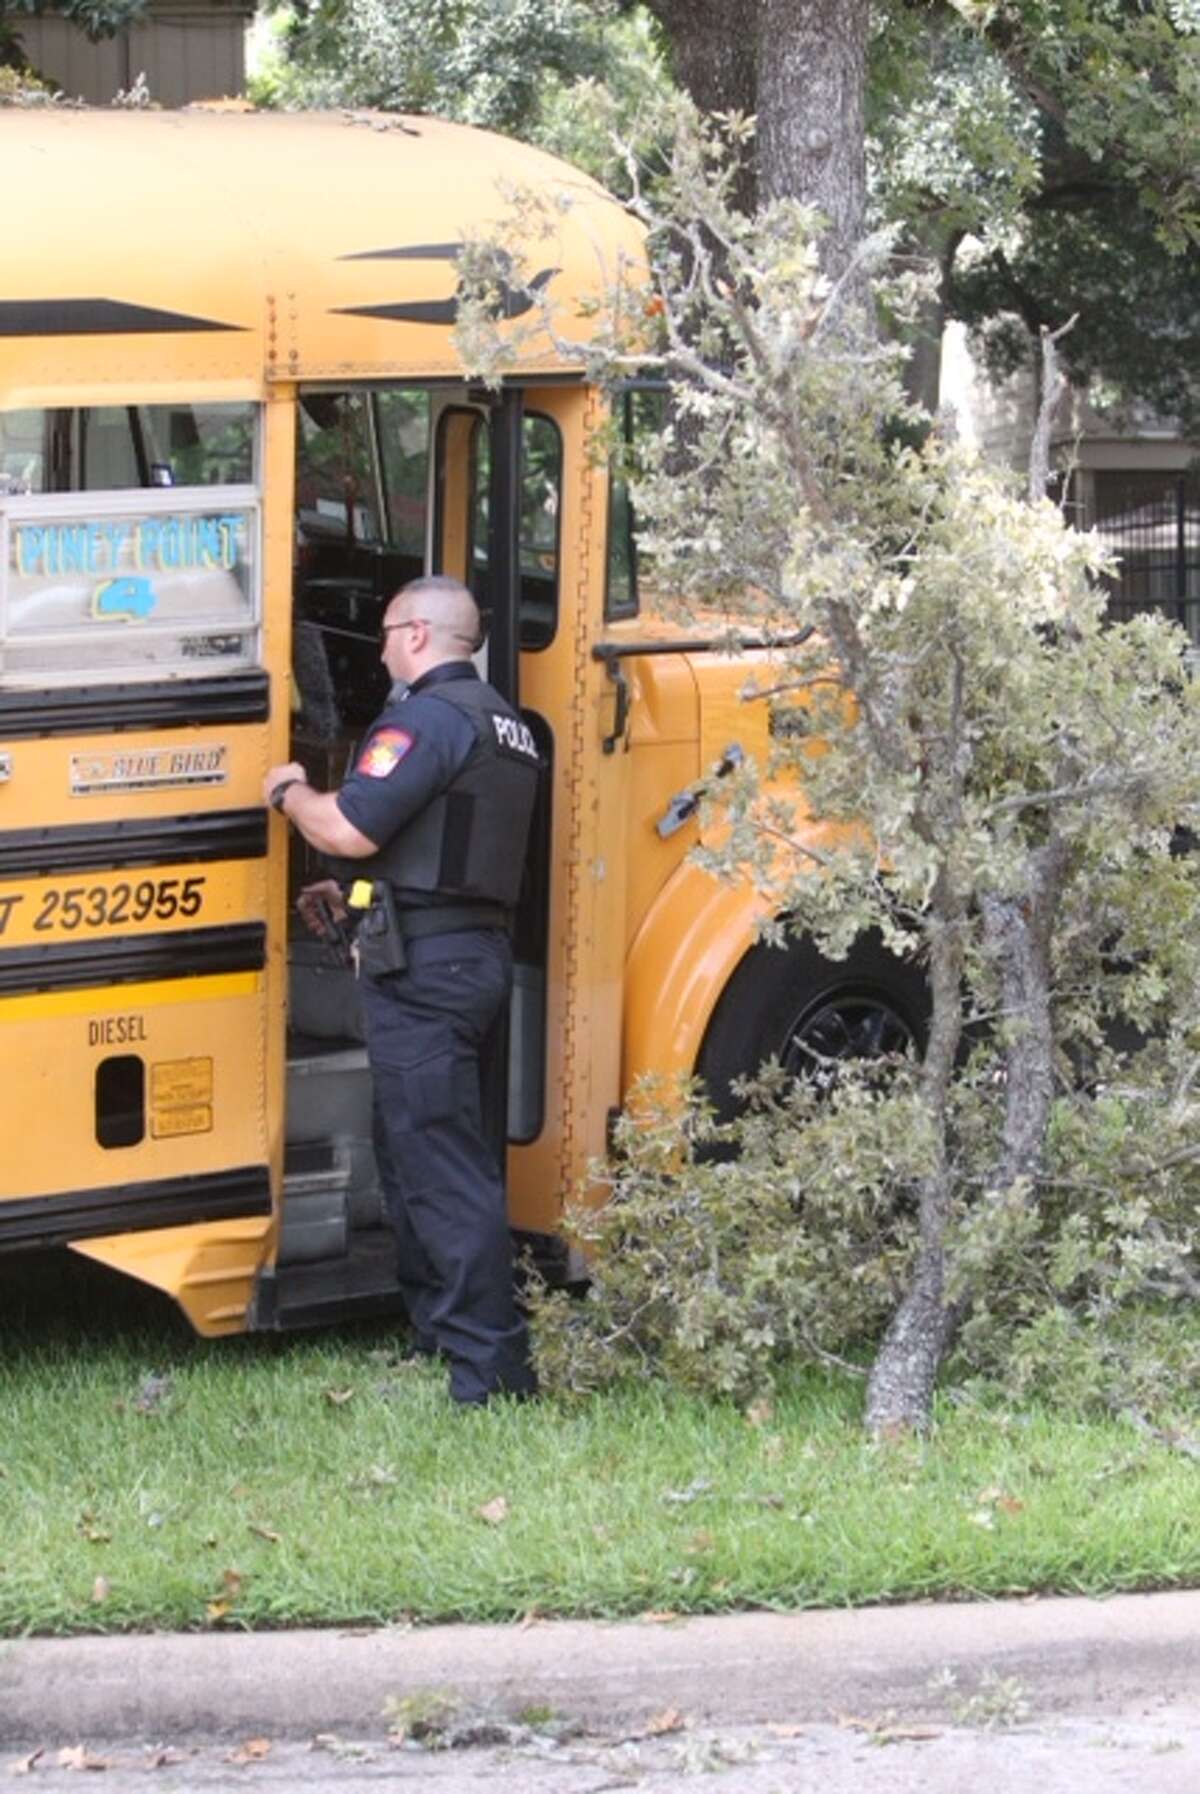 Twenty people were rushed to the hospital after a school bus was involved in a traffic crash in west Houston.